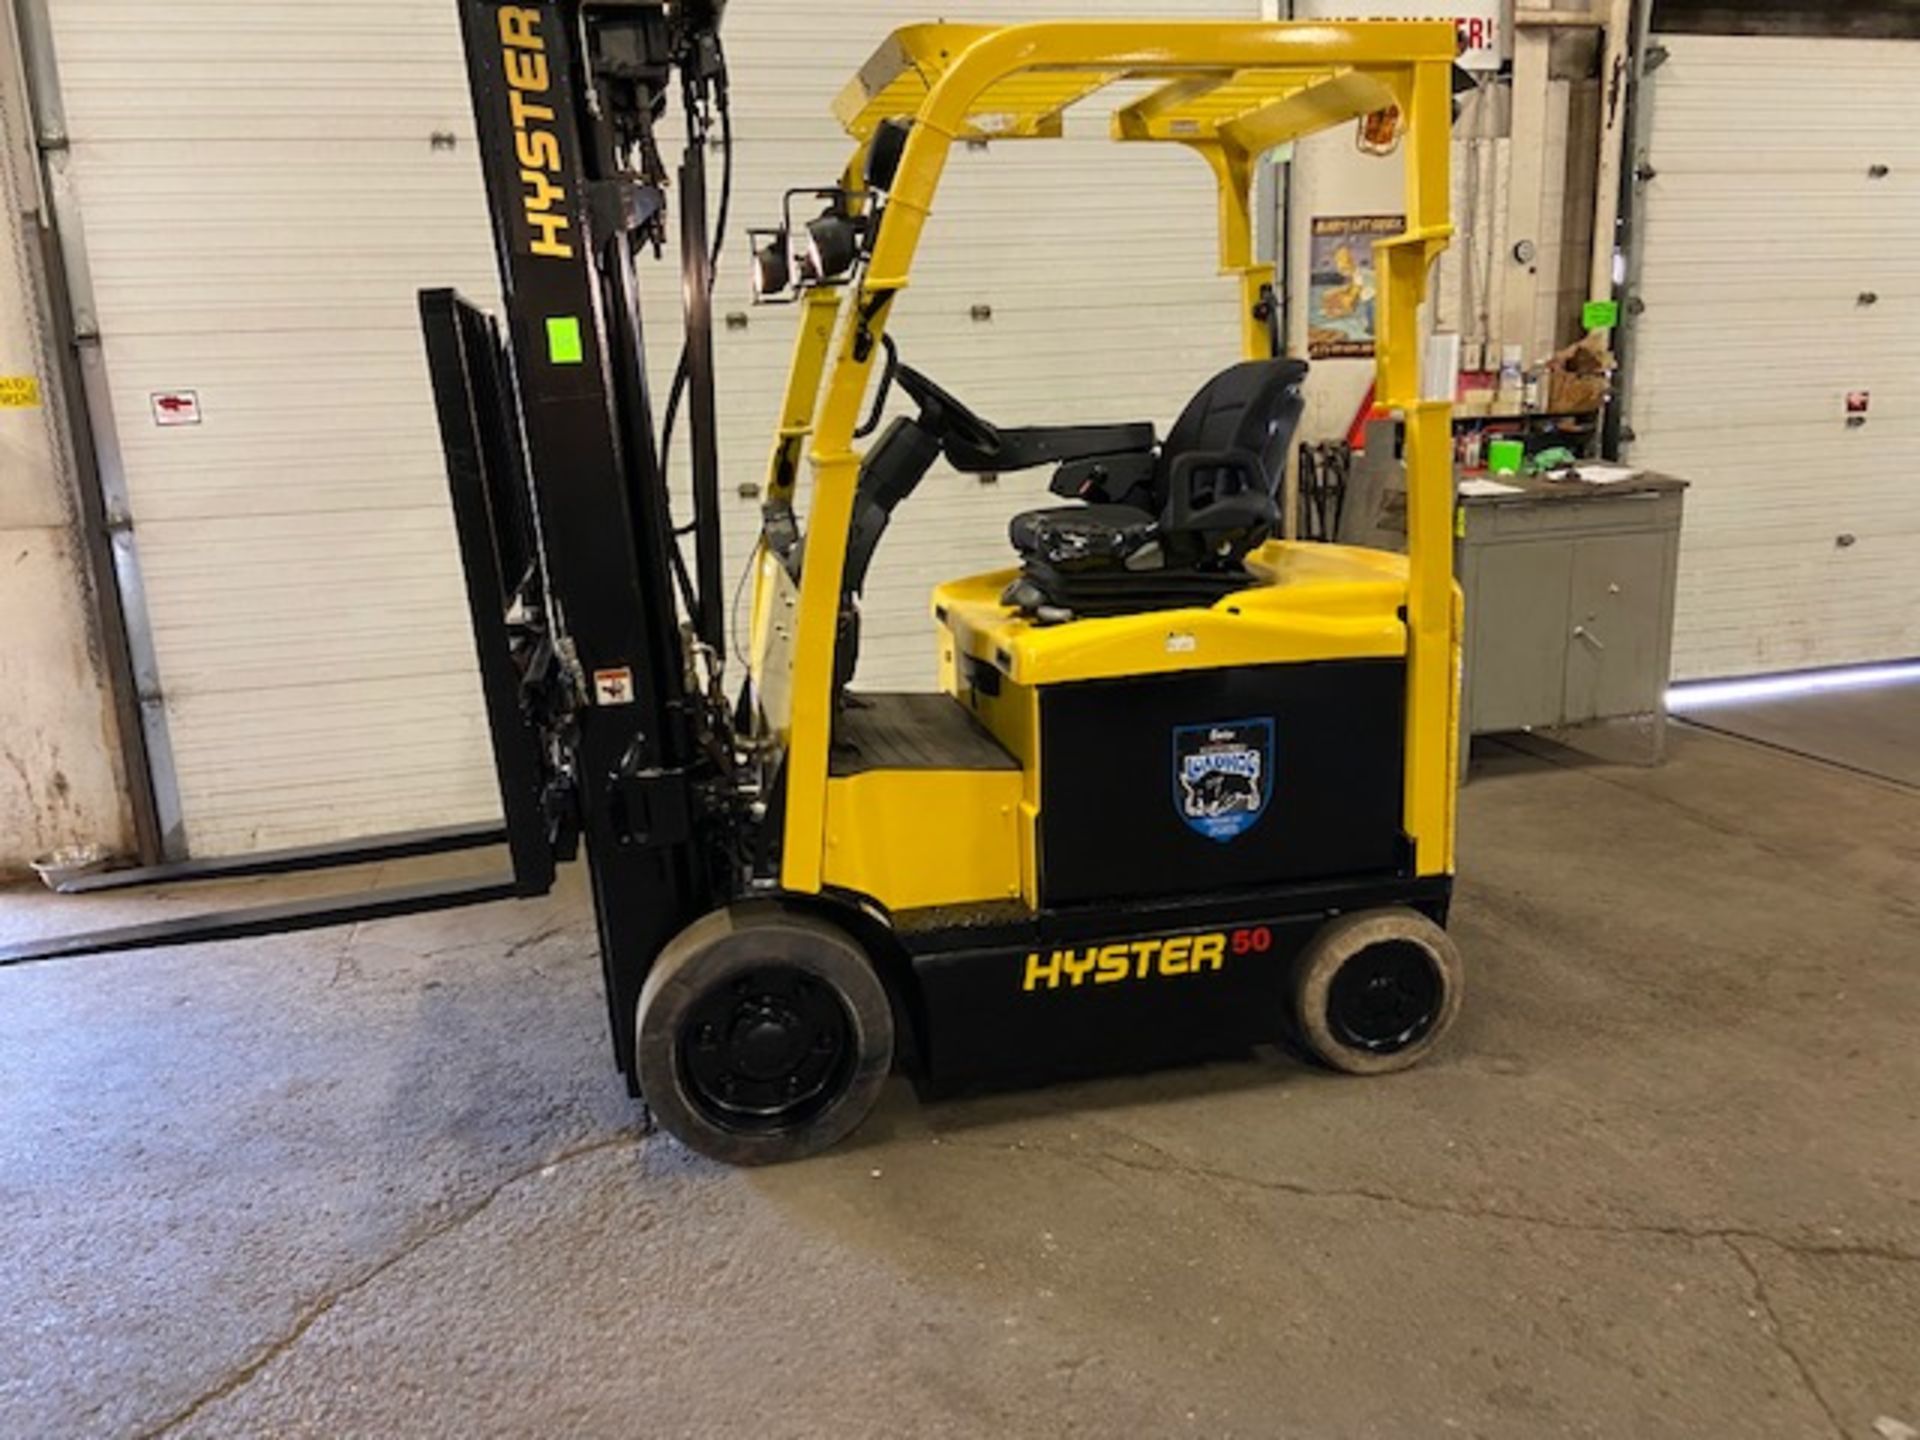 FREE CUSTOMS - 2013 Hyster 5000lbs Capacity Forklift Electric with 4-STAGE MAST with sideshift